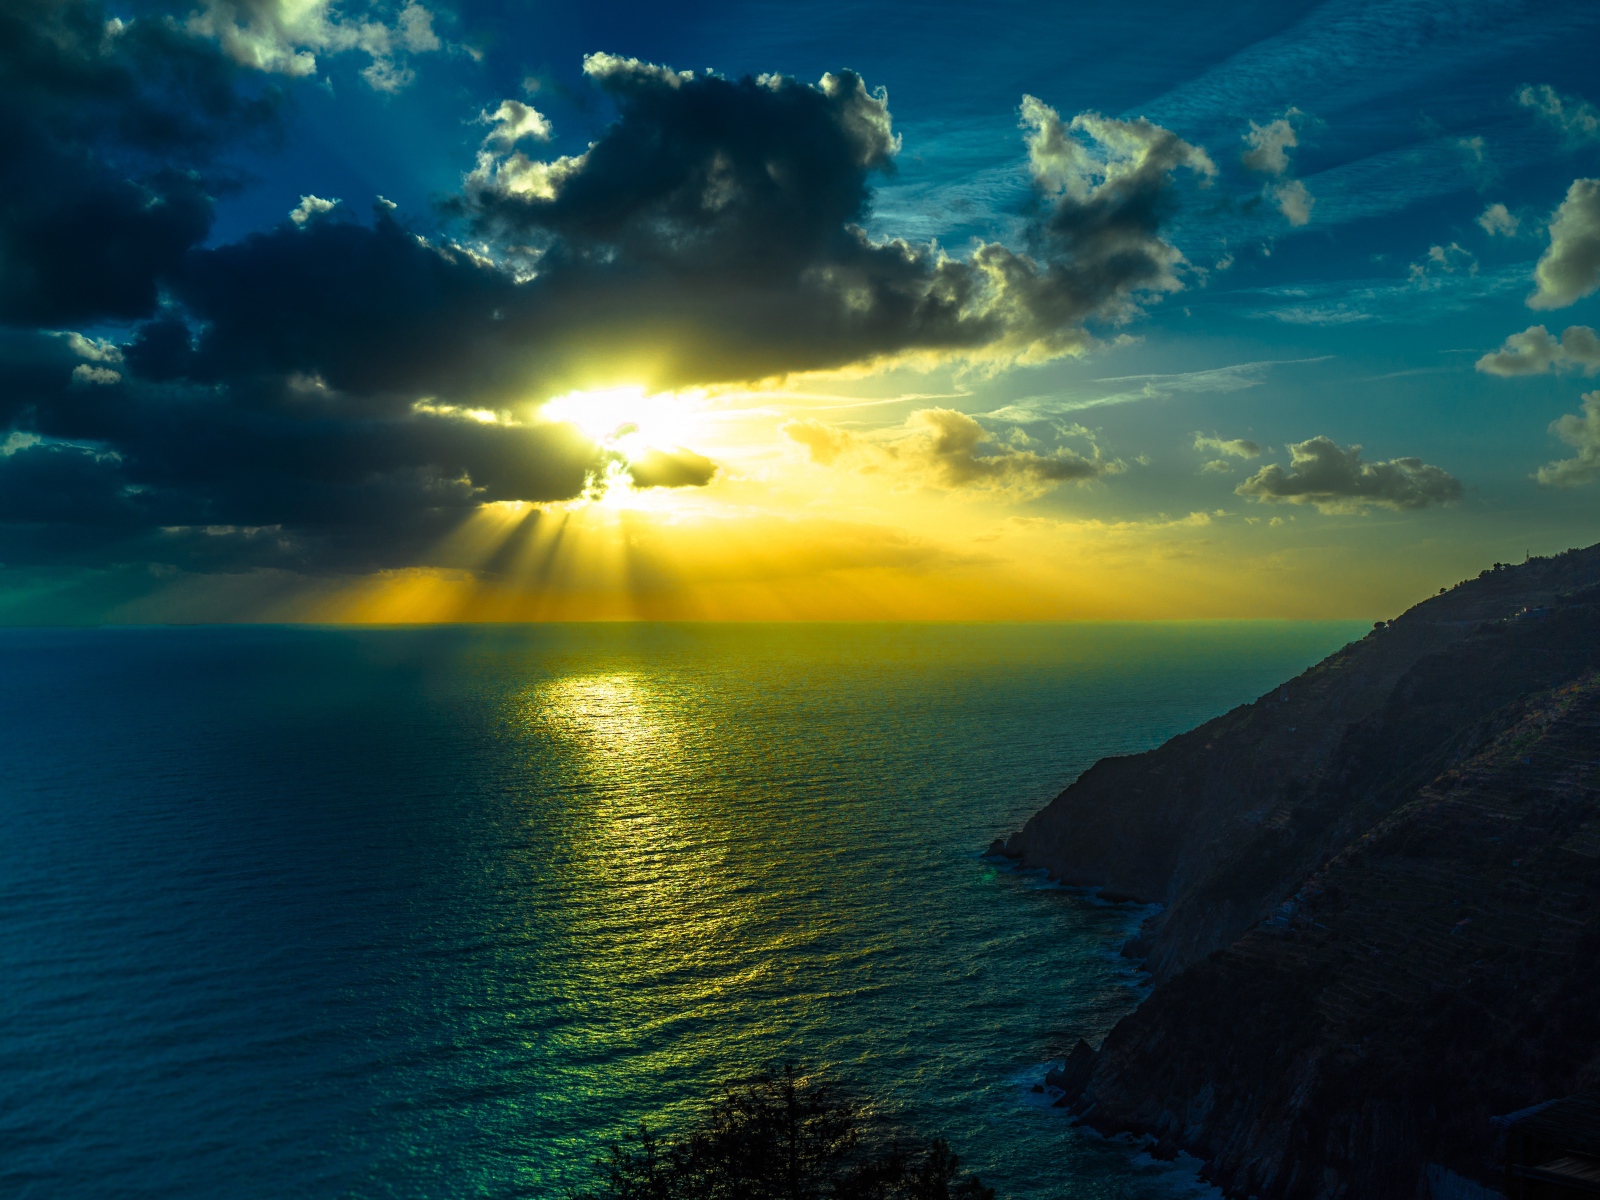 Rays of bright sun make their way through the clouds above the sea